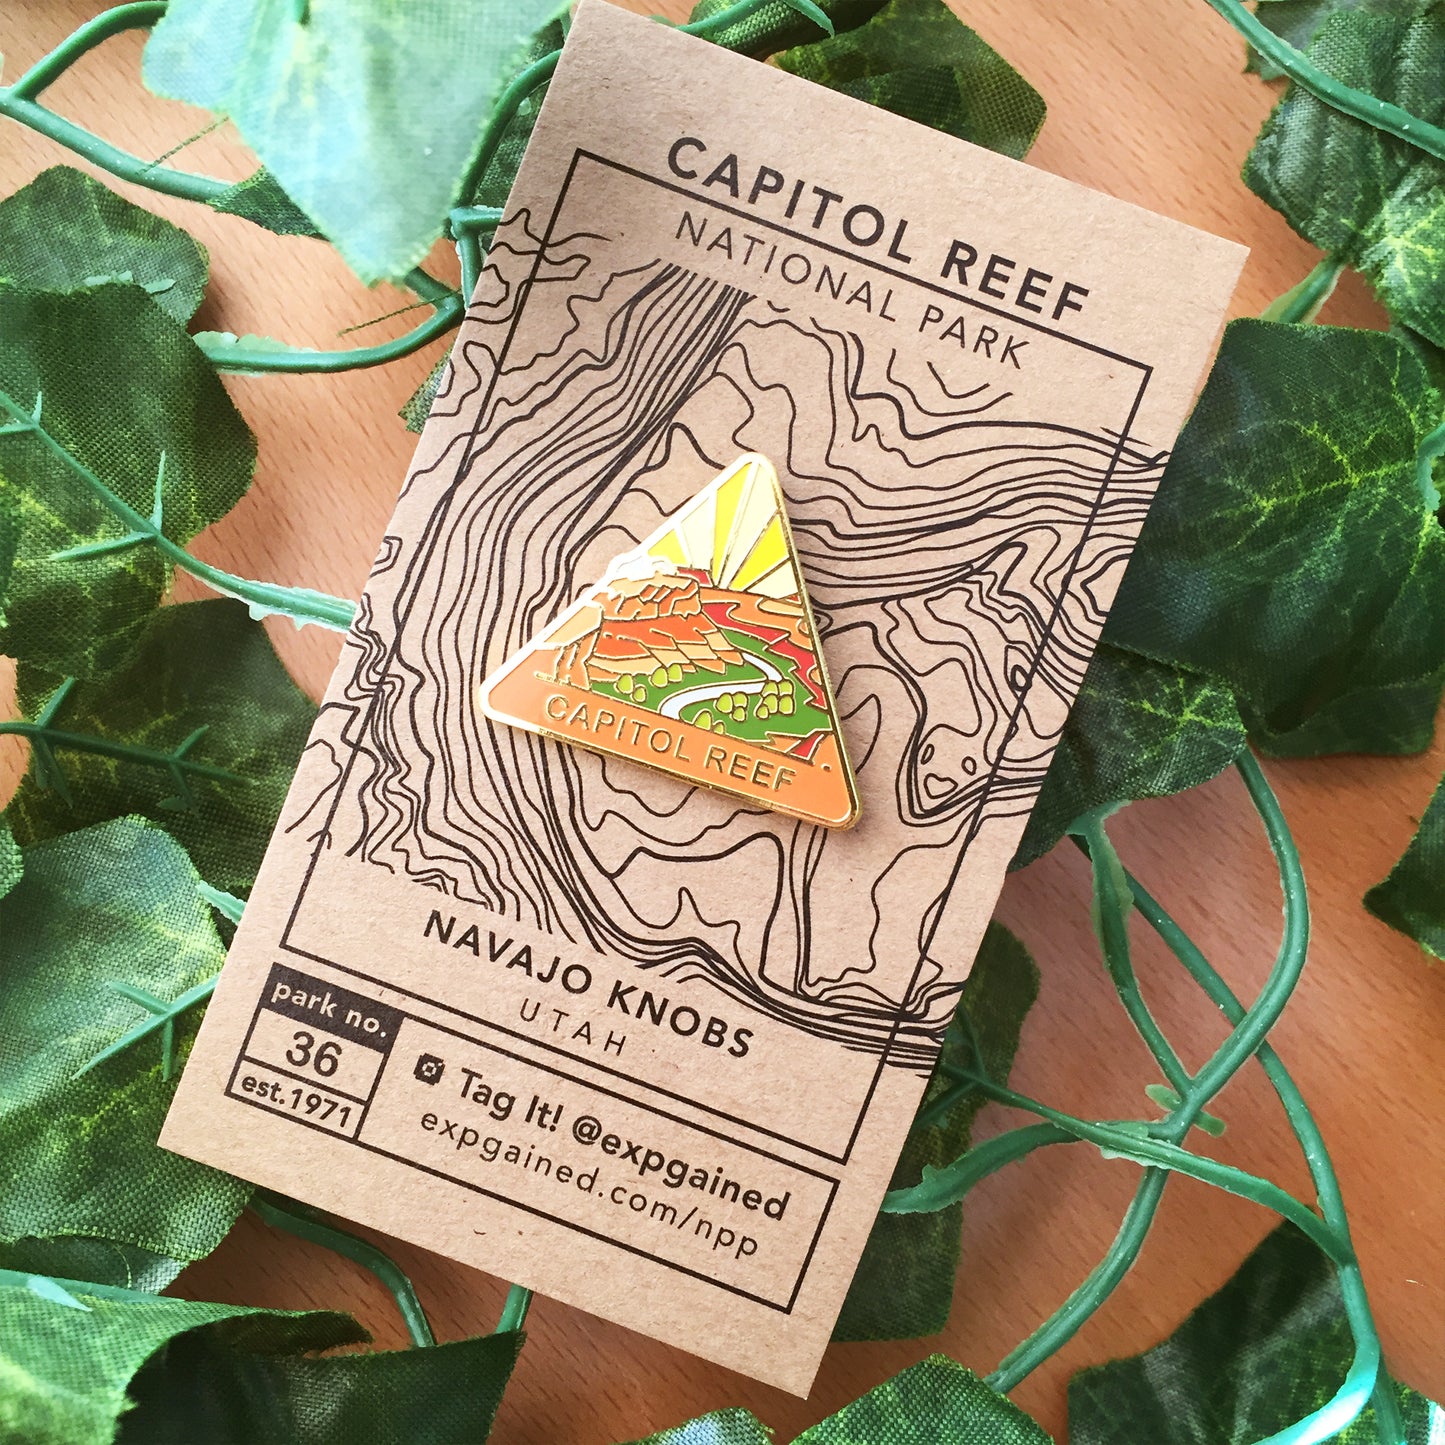 Triangle Capitol Reef national park enamel pin featuring a view from the beehive hike on a brown business card size backing card with a topo map of Navajo Knobs.